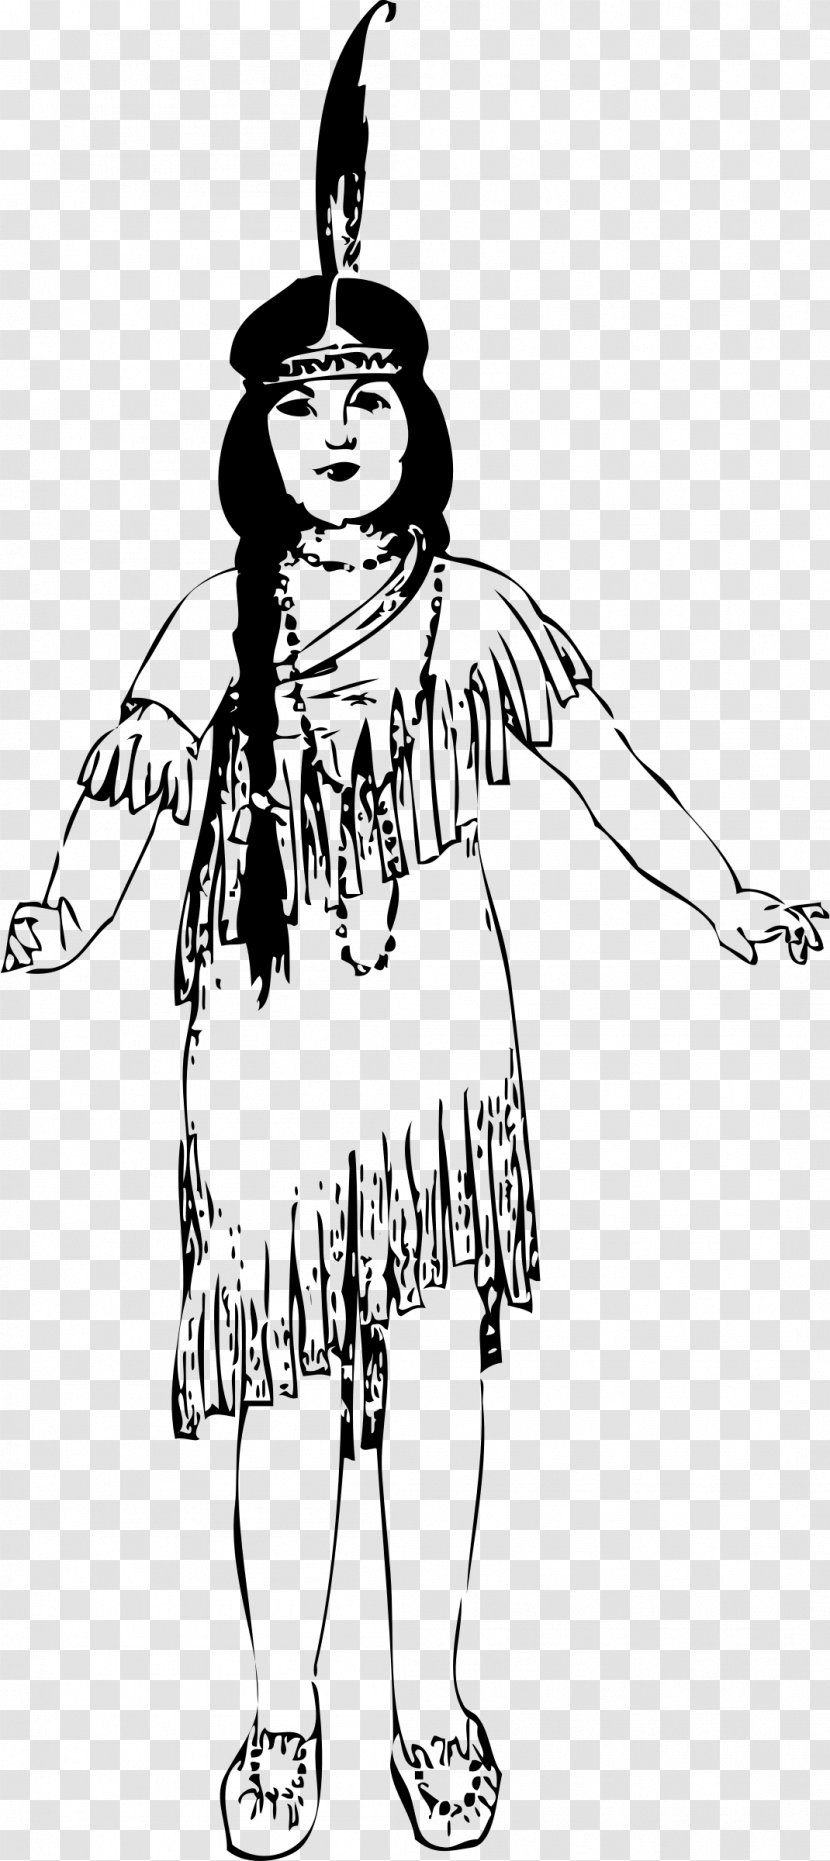 Native Americans In The United States Clip Art - Drawing - Indians Transparent PNG